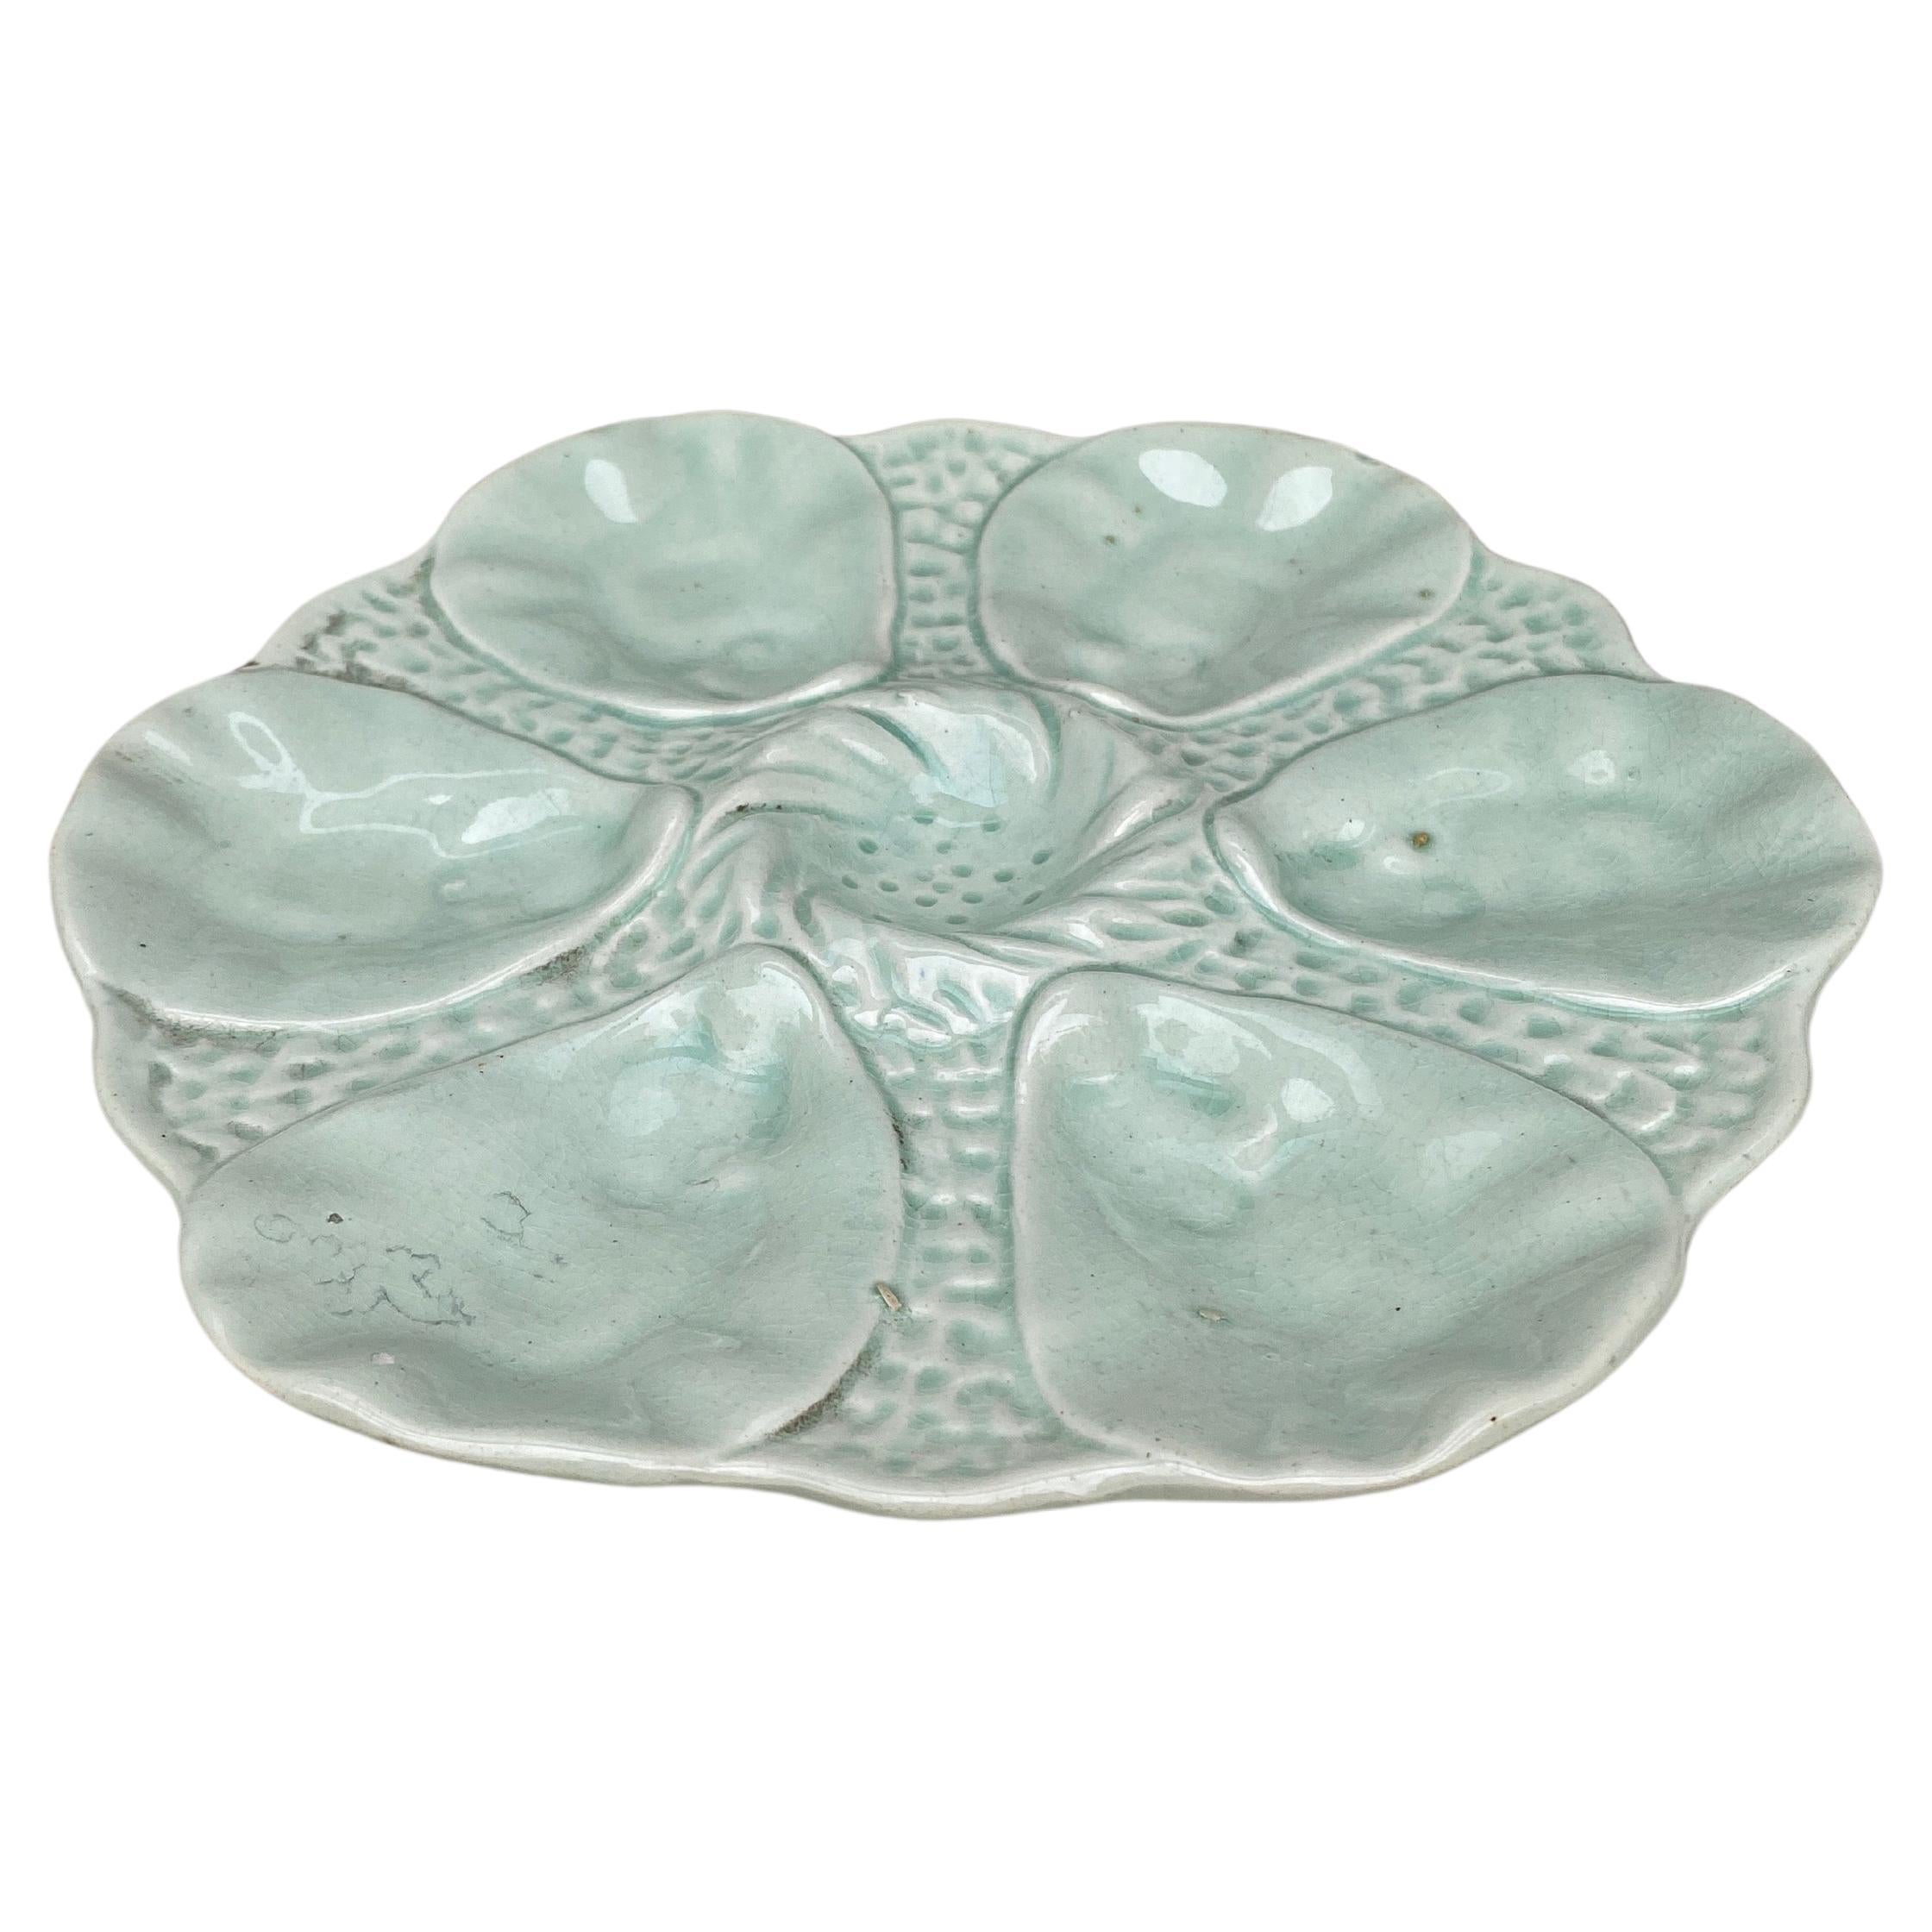 French Majolica oyster plate Orchies, circa 1910.
Celadon color.